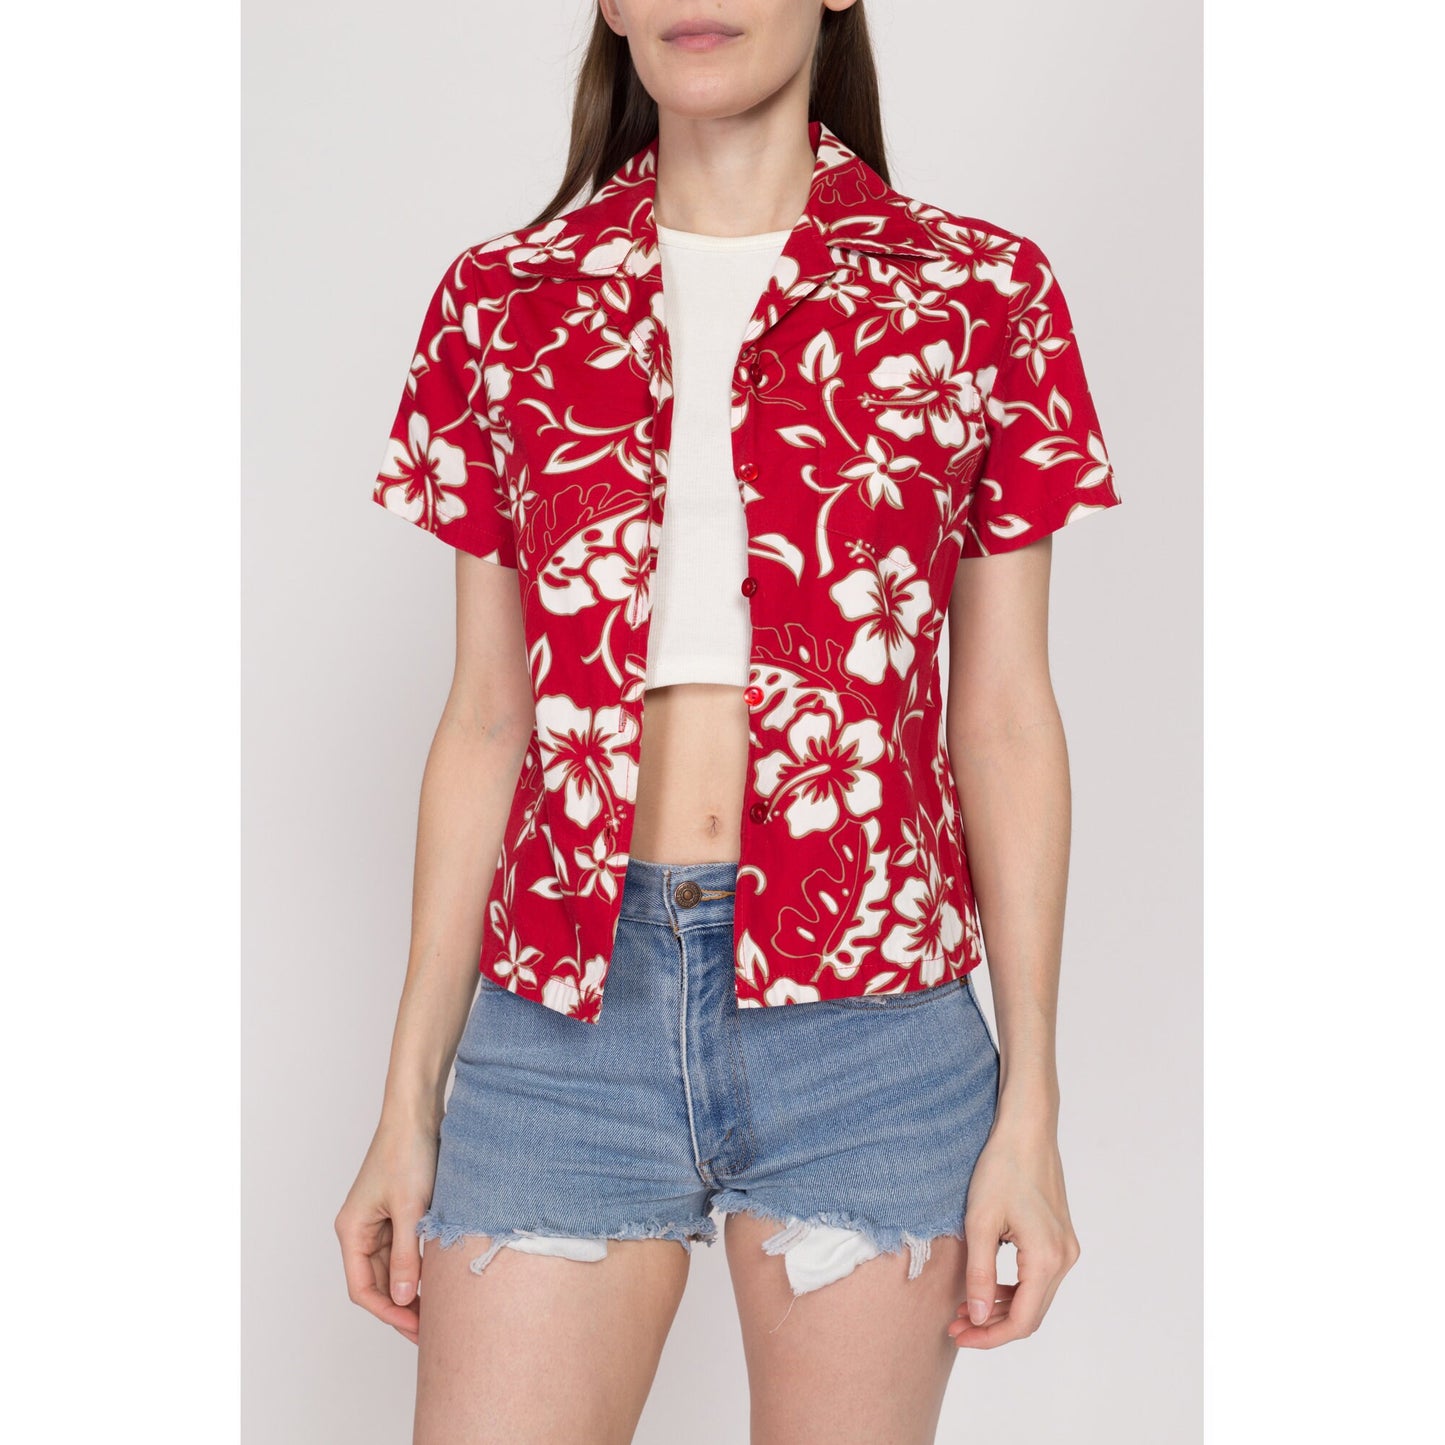 XS 90s Red Floral Hawaiian Aloha Shirt | Vintage Tropical Print Cotton Short Sleeve Button Up Collared Top